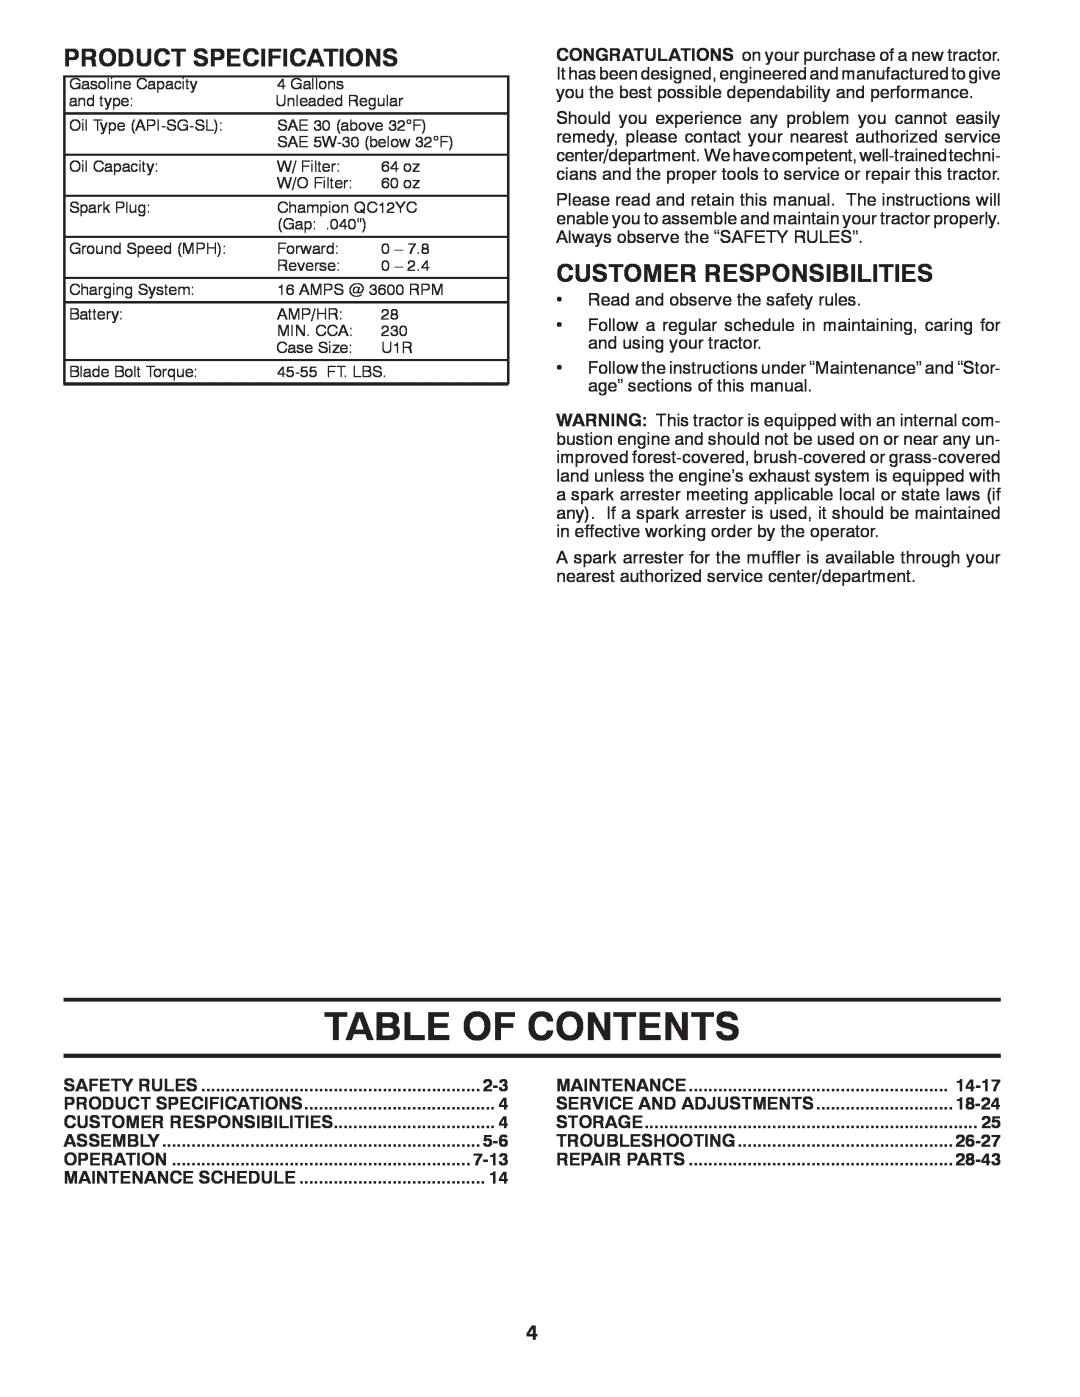 Husqvarna GTH2752TF owner manual Table Of Contents, Product Specifications, Customer Responsibilities 